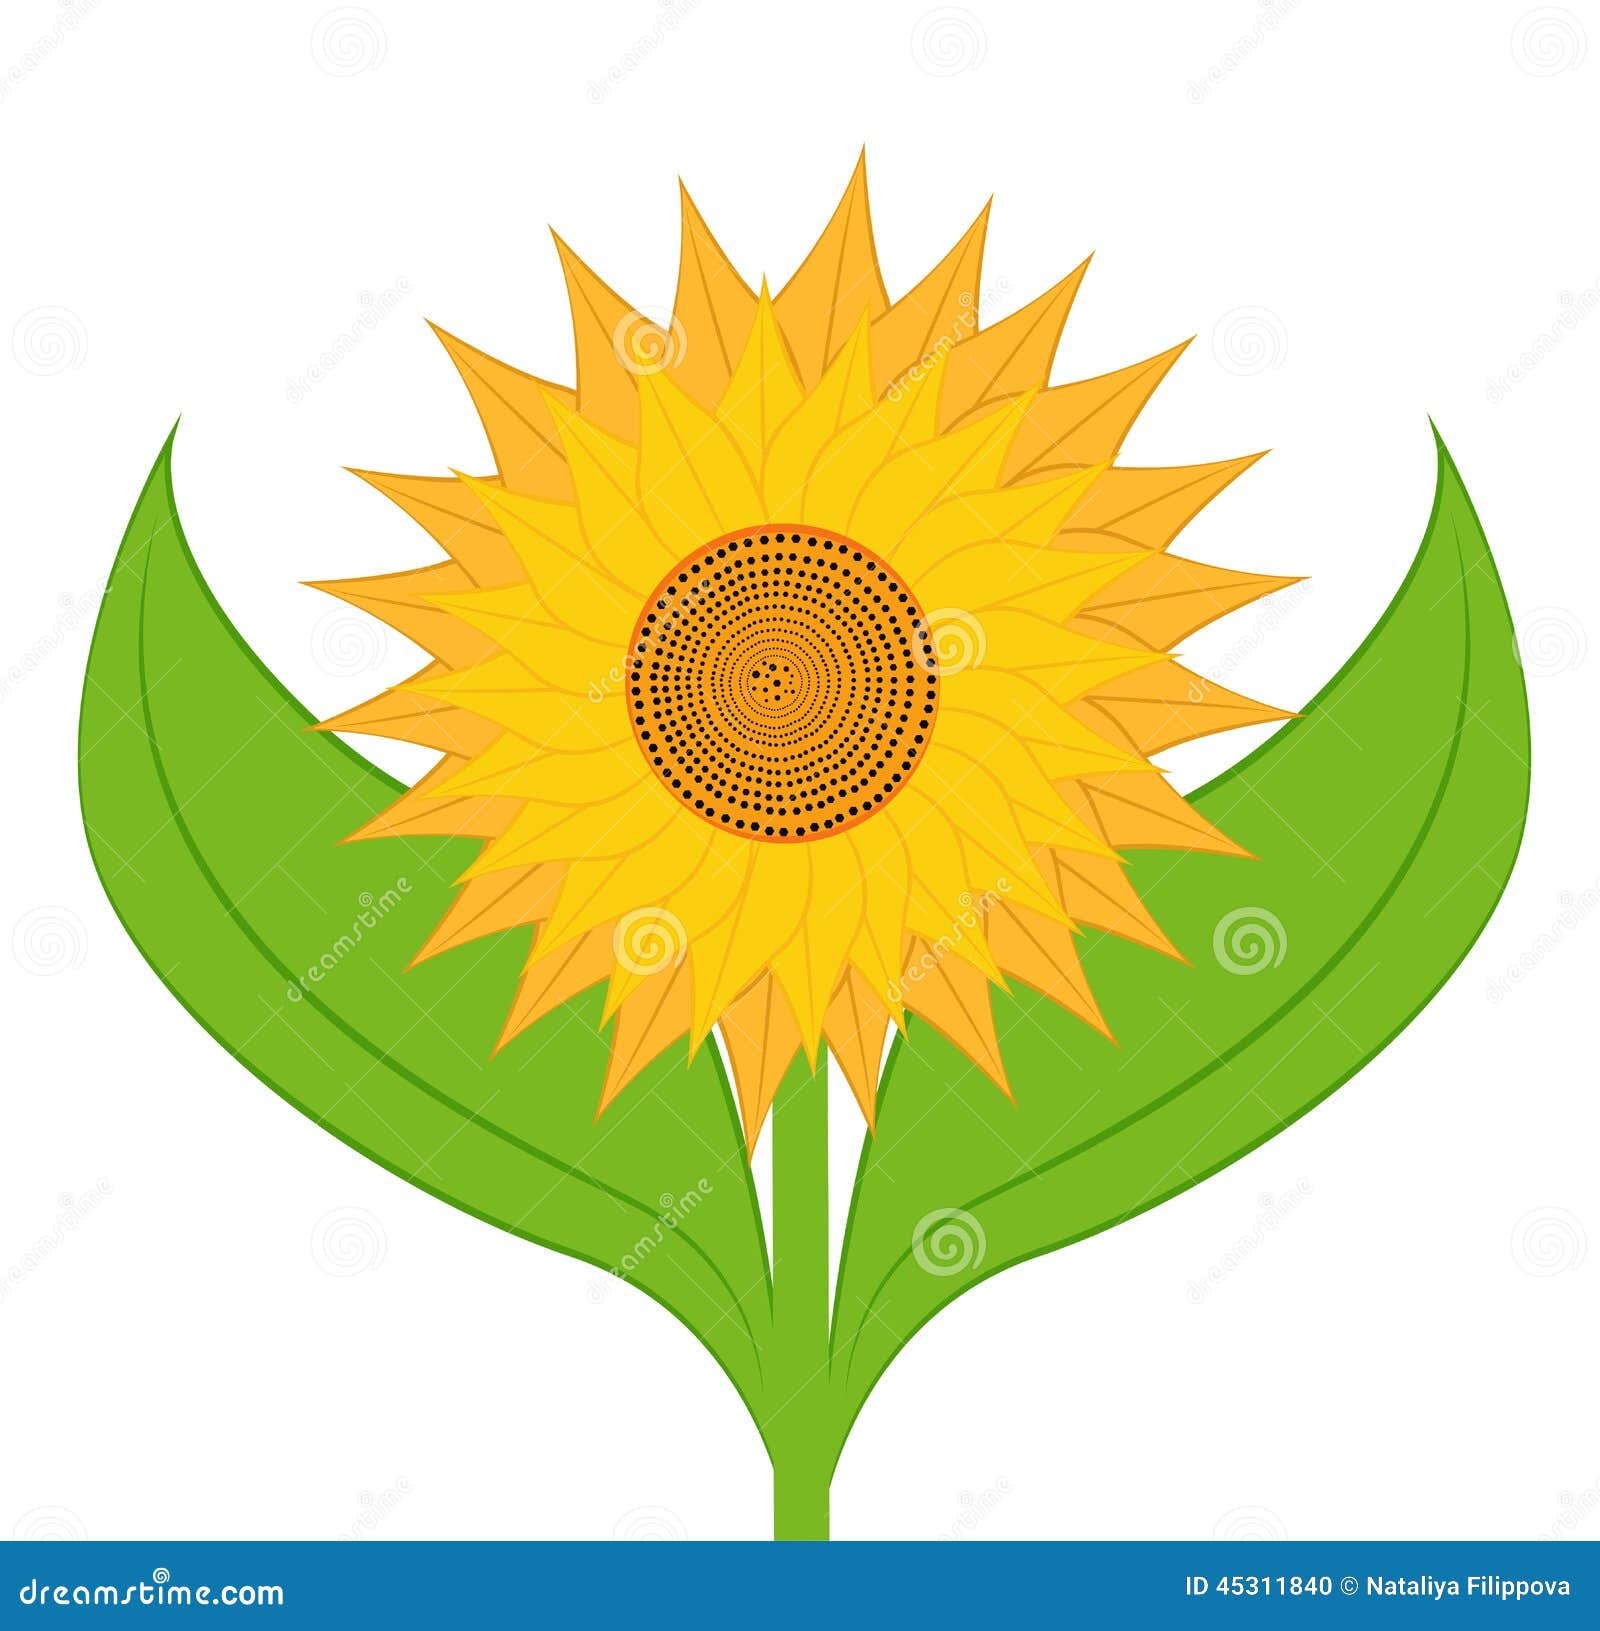 Sunflower Leaves Svg - Free Layered SVG Files